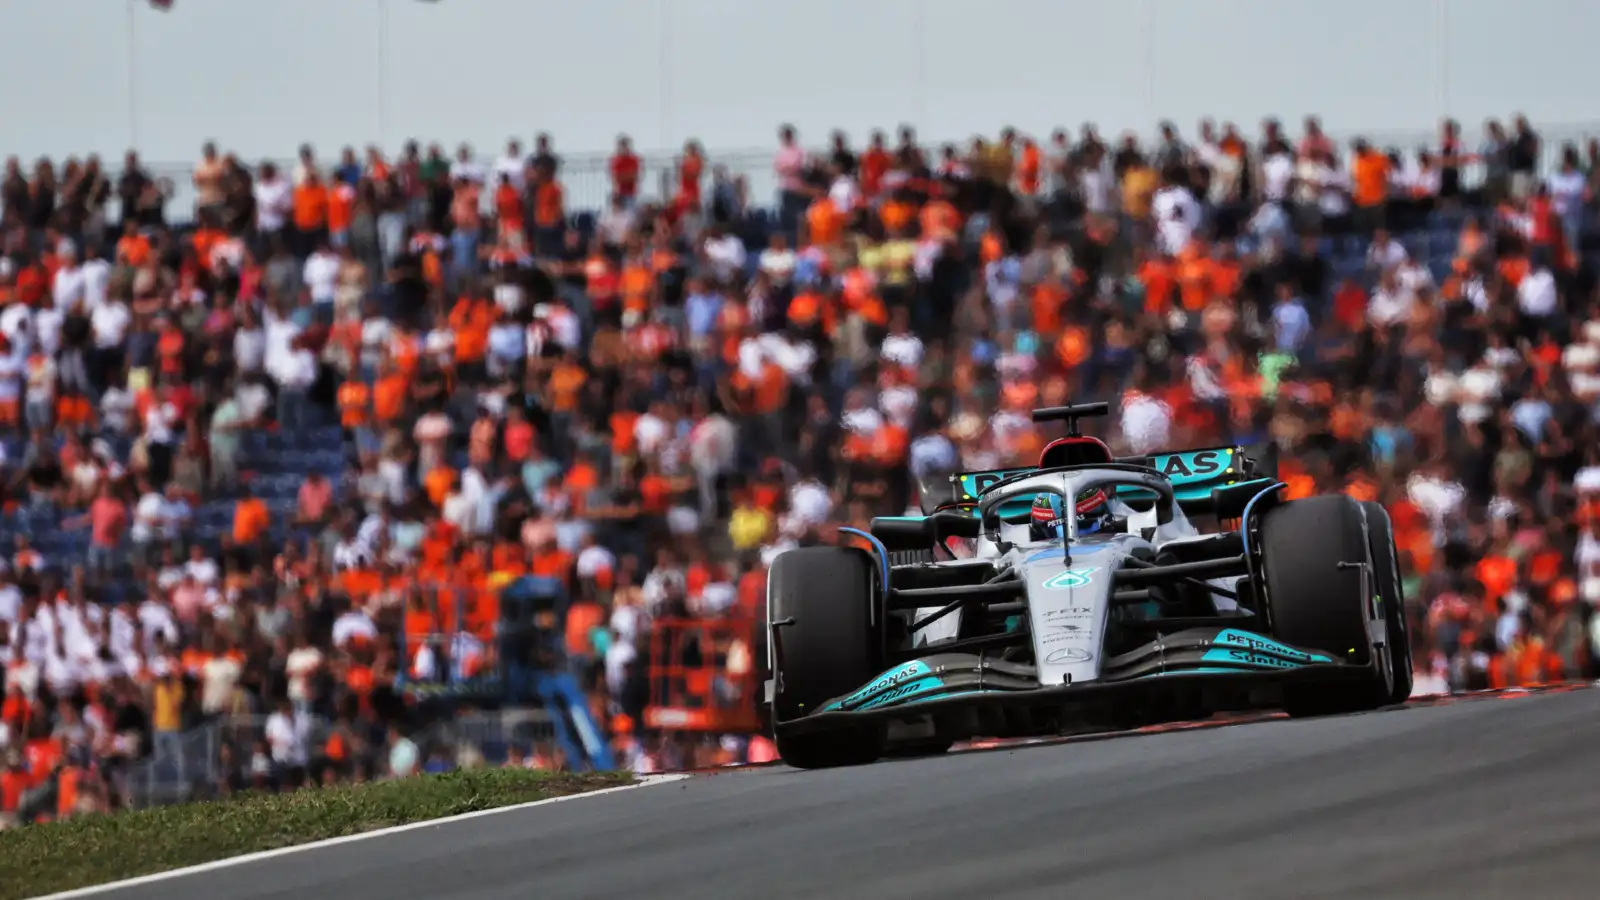 Mercedes' George Russell on track during first practice for the Dutch Grand Prix. Zandvoort, September 2022.